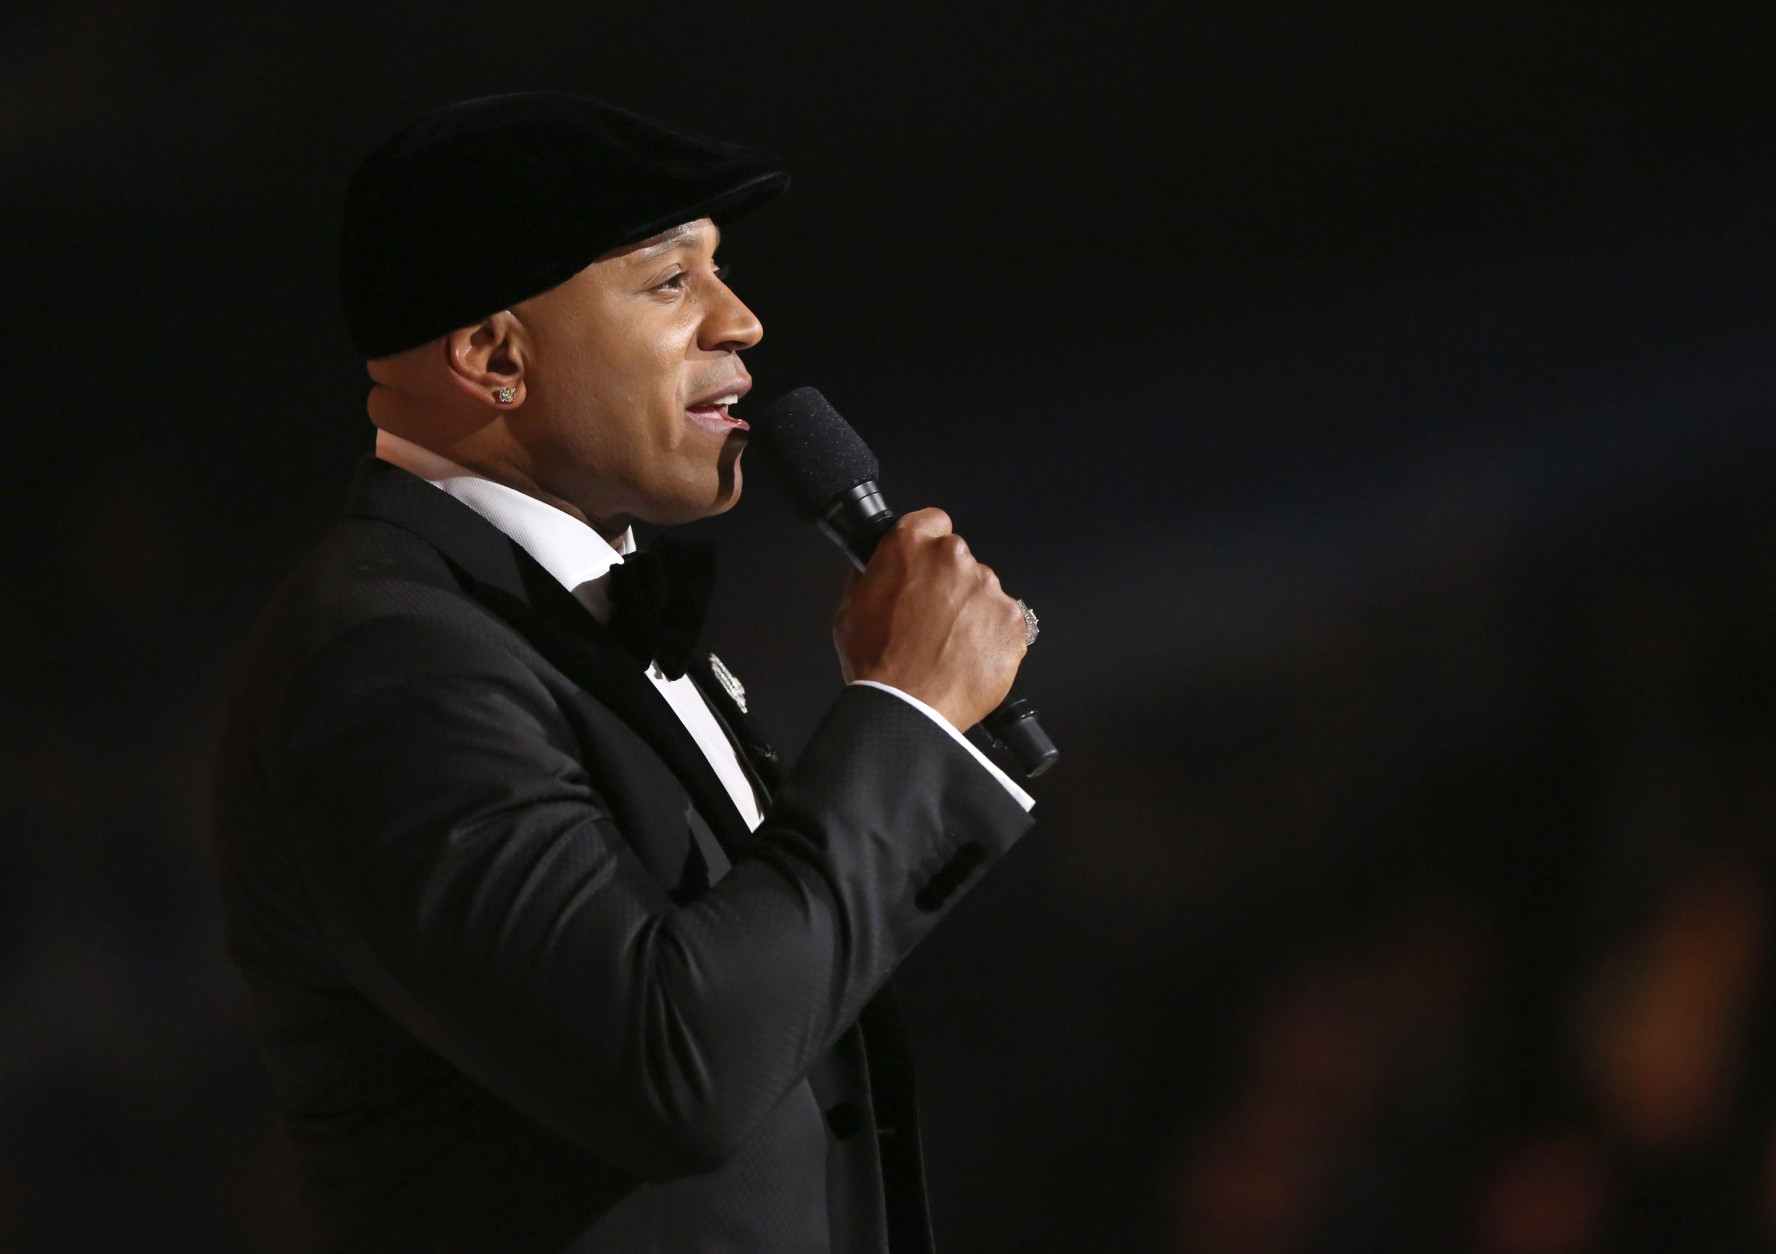 Host LL Cool J speaks at the 58th annual Grammy Awards on Monday, Feb. 15, 2016, in Los Angeles. (Photo by Matt Sayles/Invision/AP)